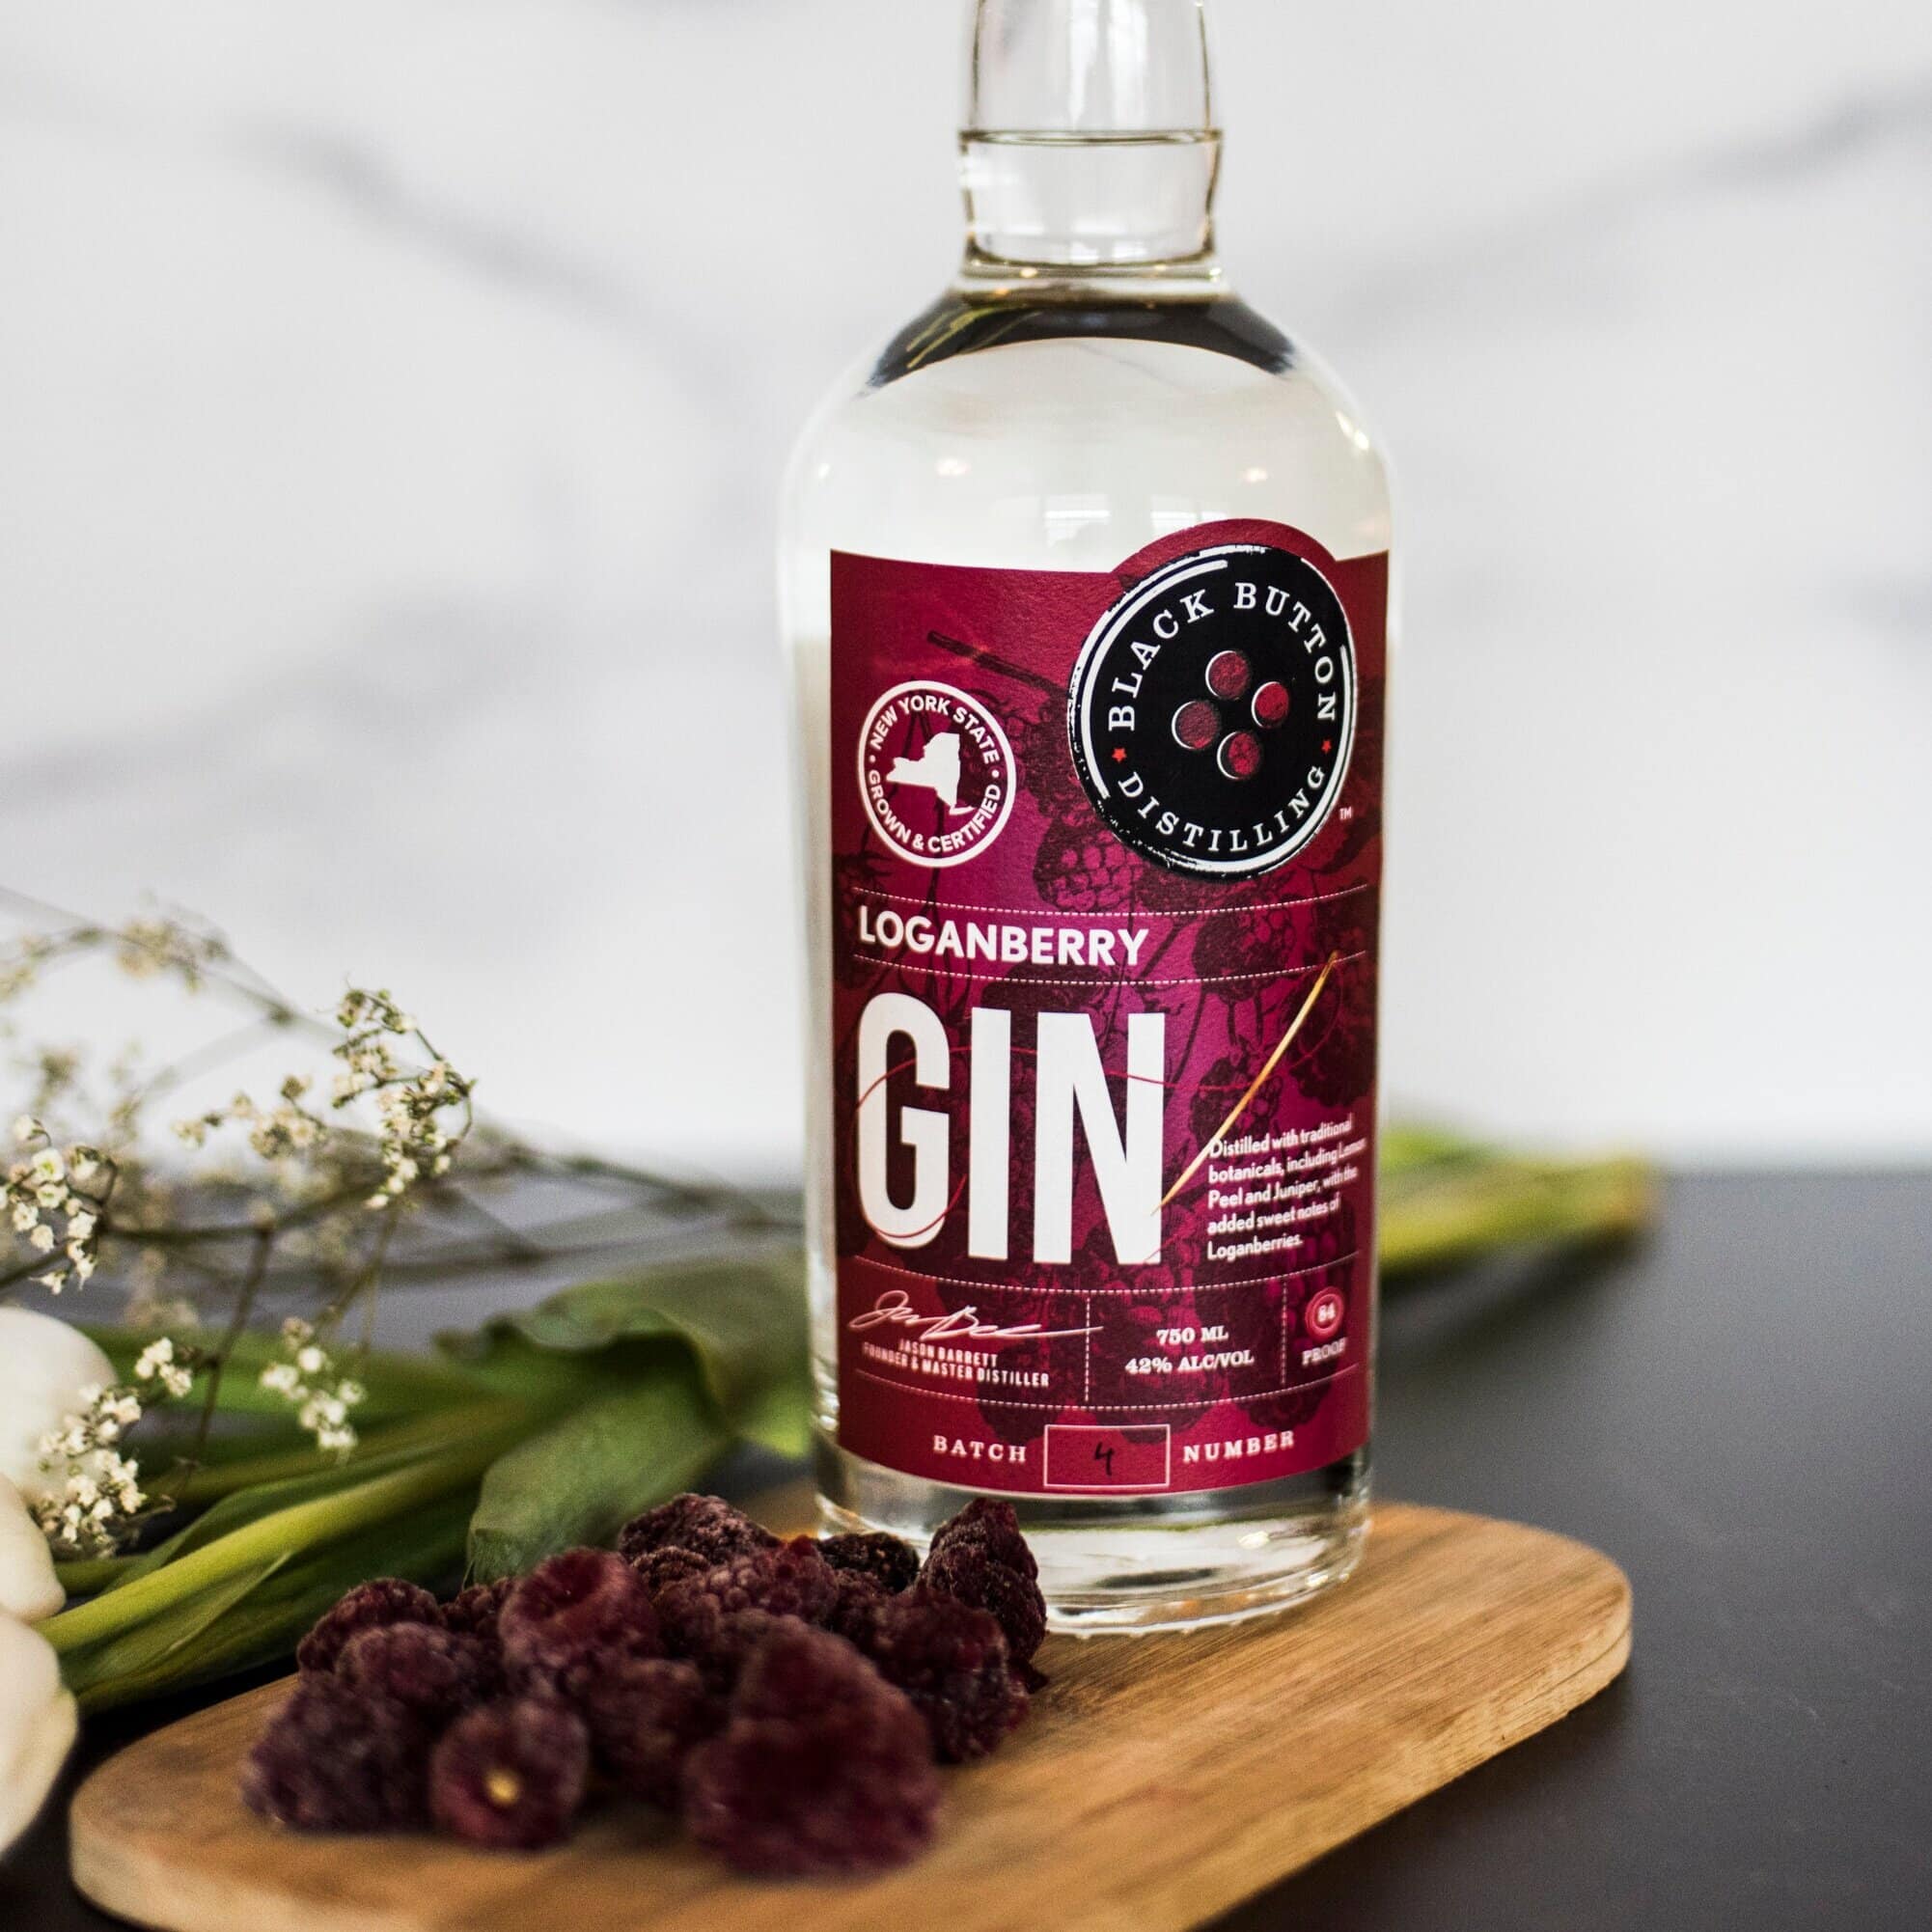 Black Button Distilling To Release Limited Edition Loganberry Gin On July 17